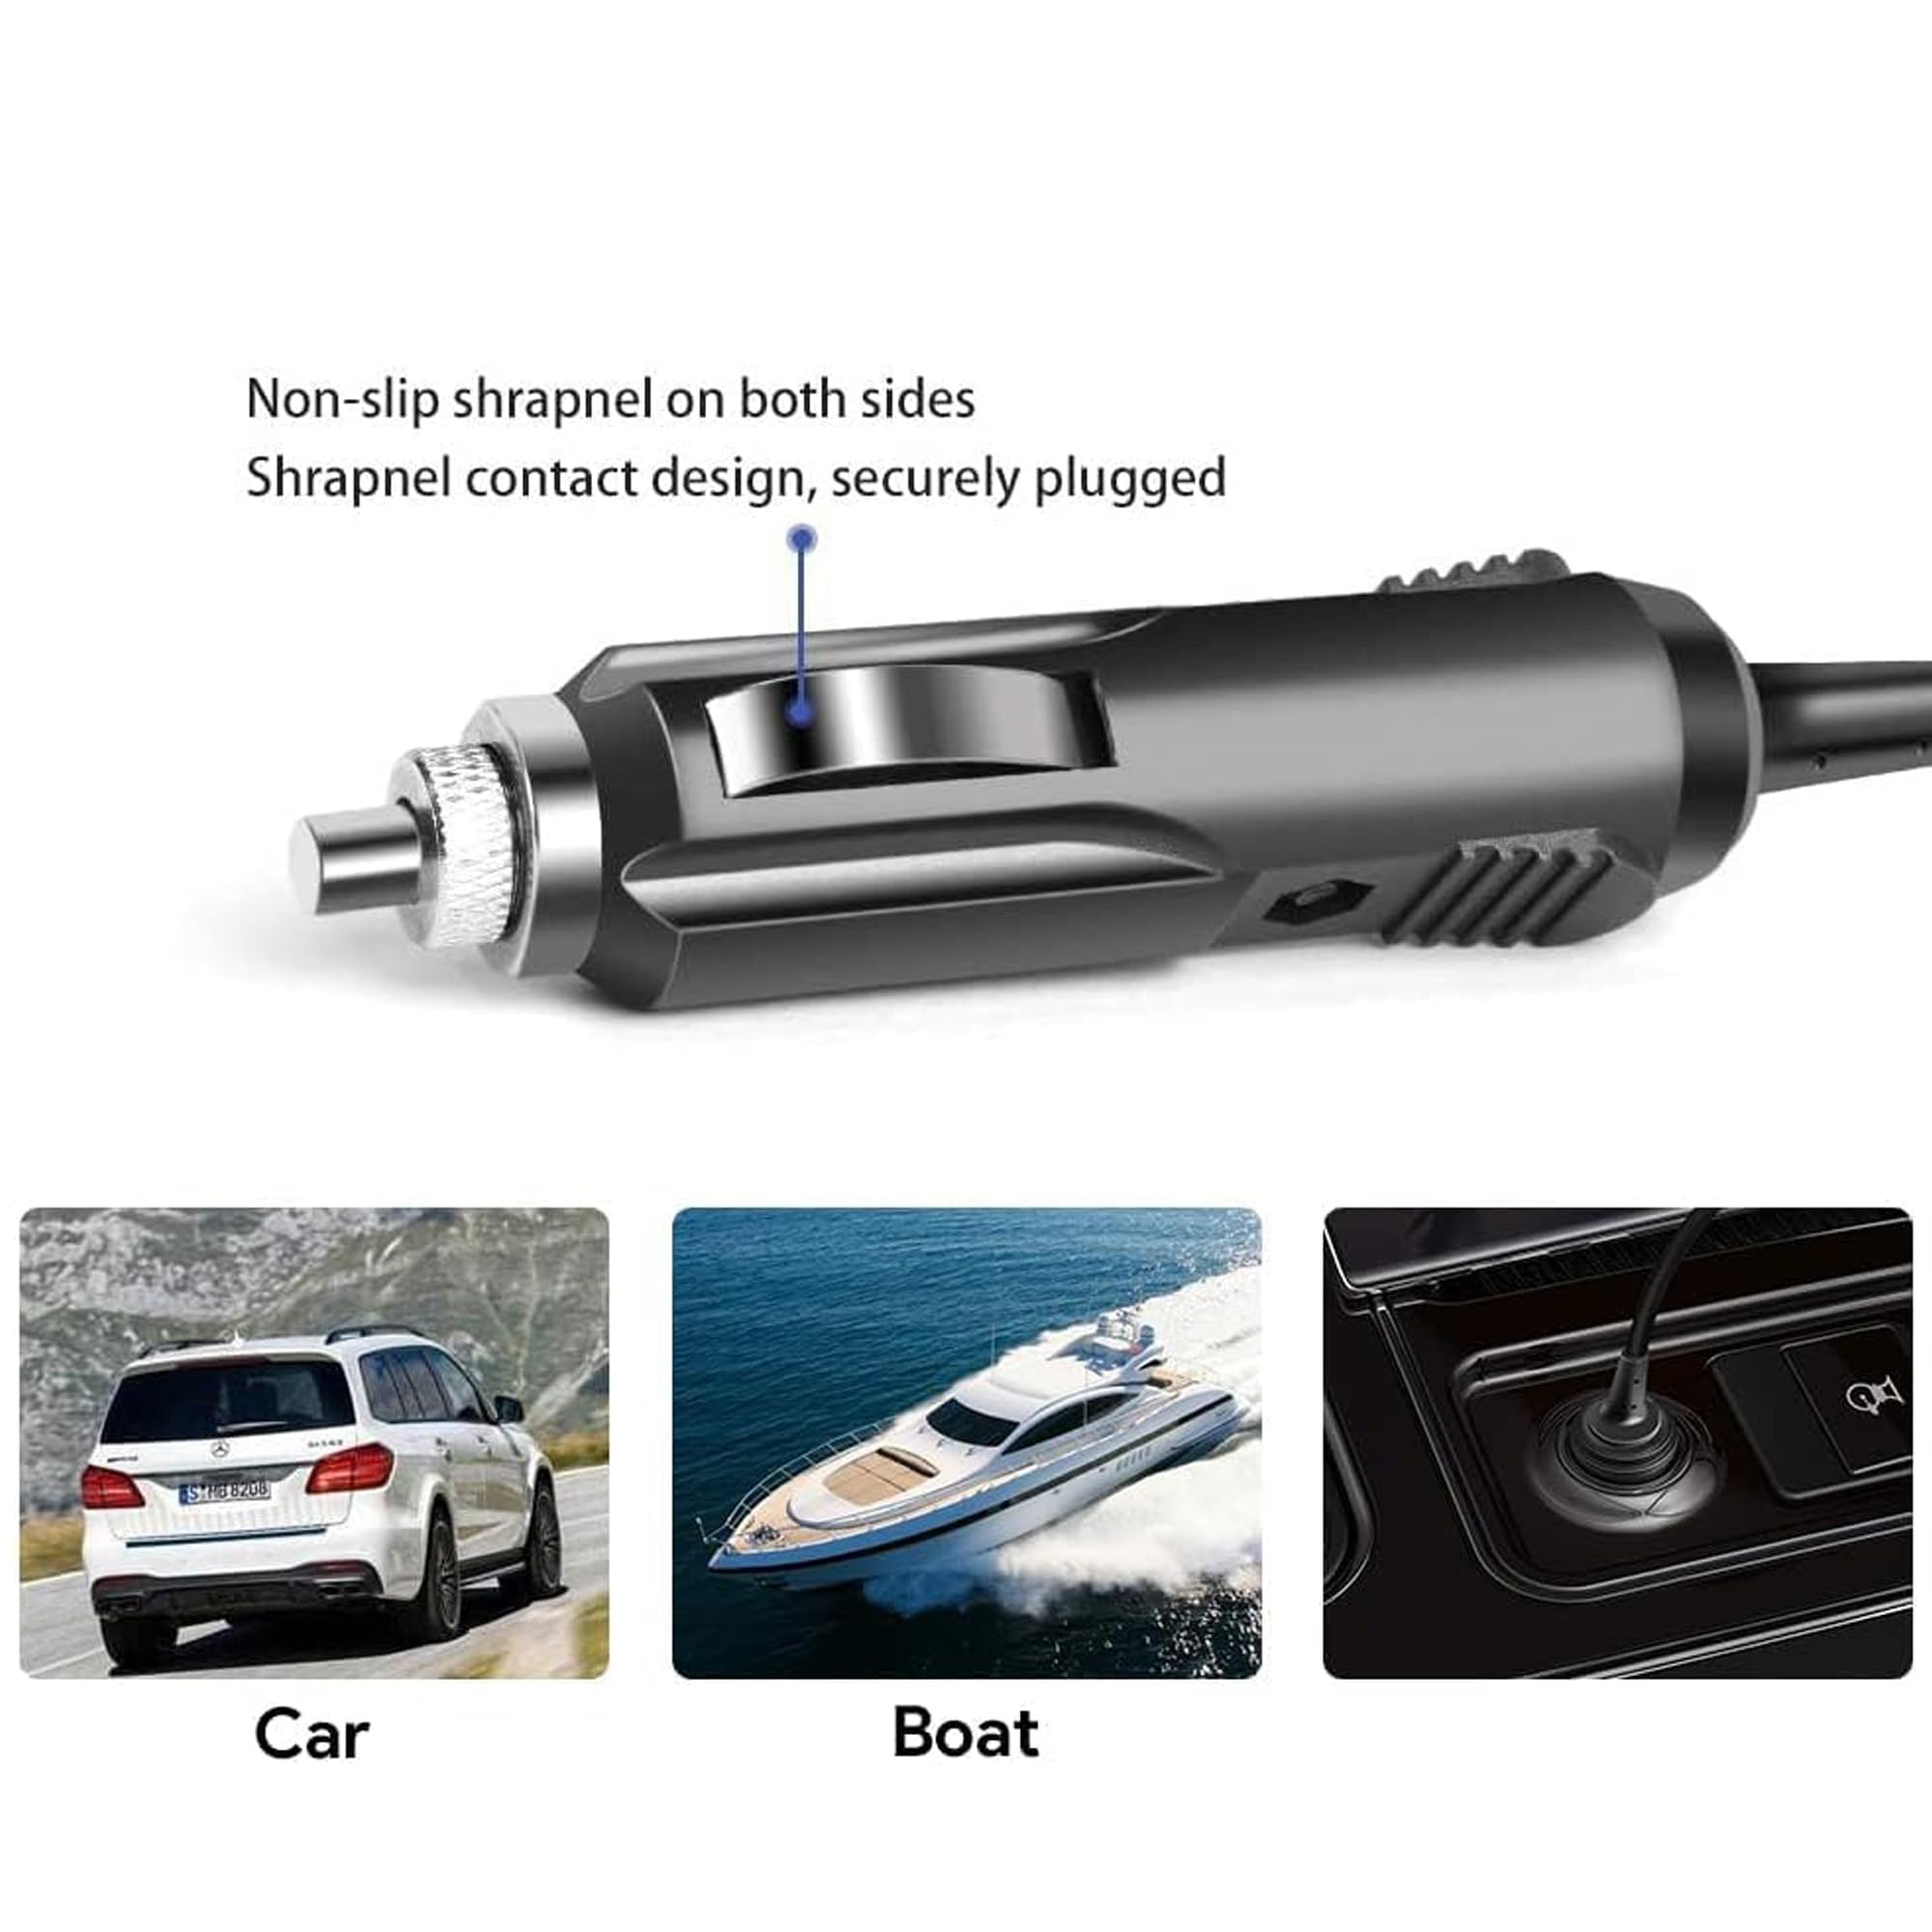 Guy-Tech Car DC Adapter Compatible with Cobra XRS 9695 XRS-9485 /Detector Auto Vehicle Boat RV Camper Plug Power Supply Cord